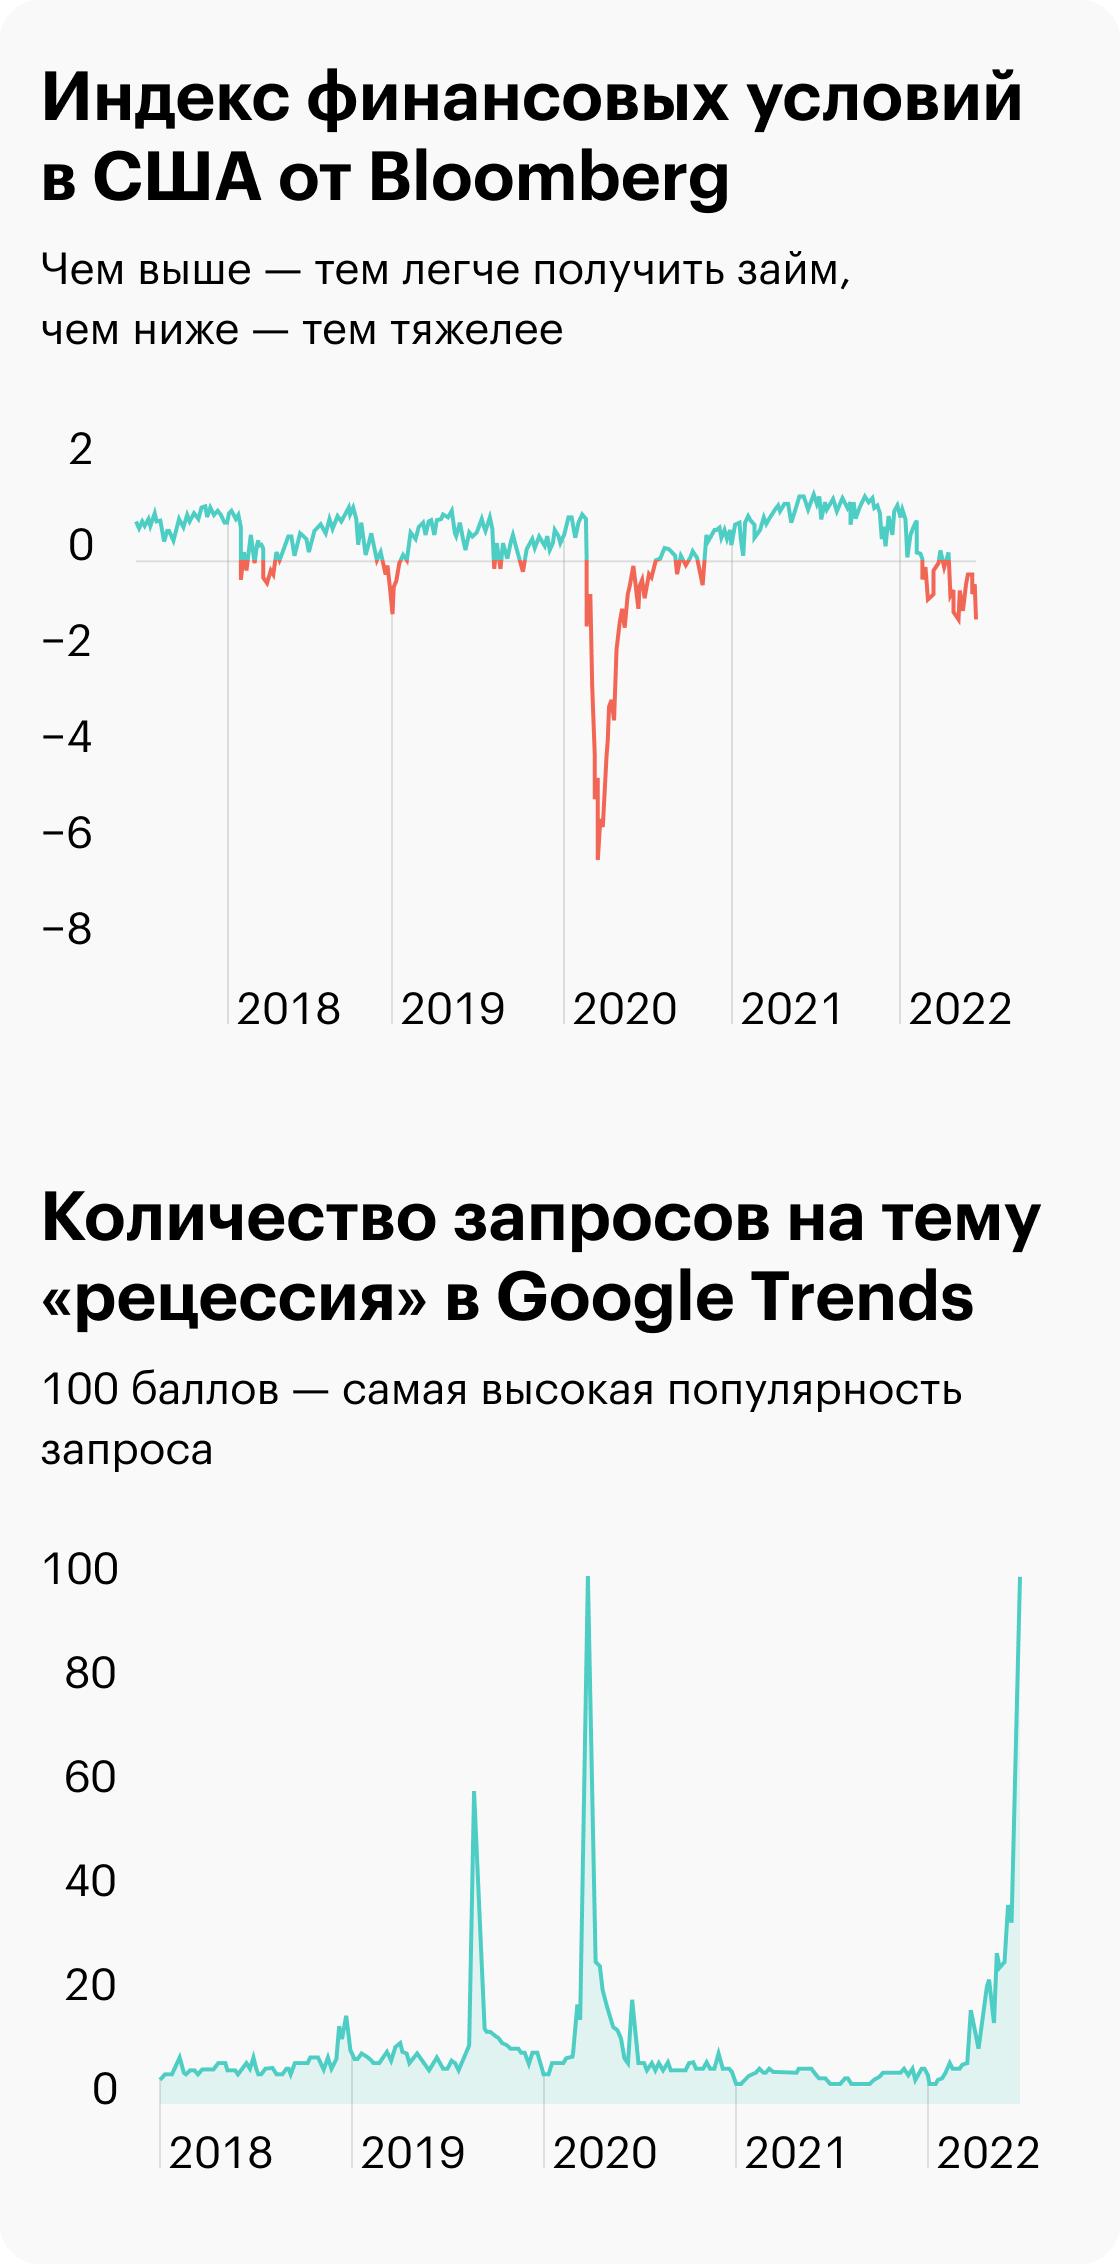 Источник: Daily Shot, Financial conditions tighten further, Google search frequency for “recession” surged in recent weeks